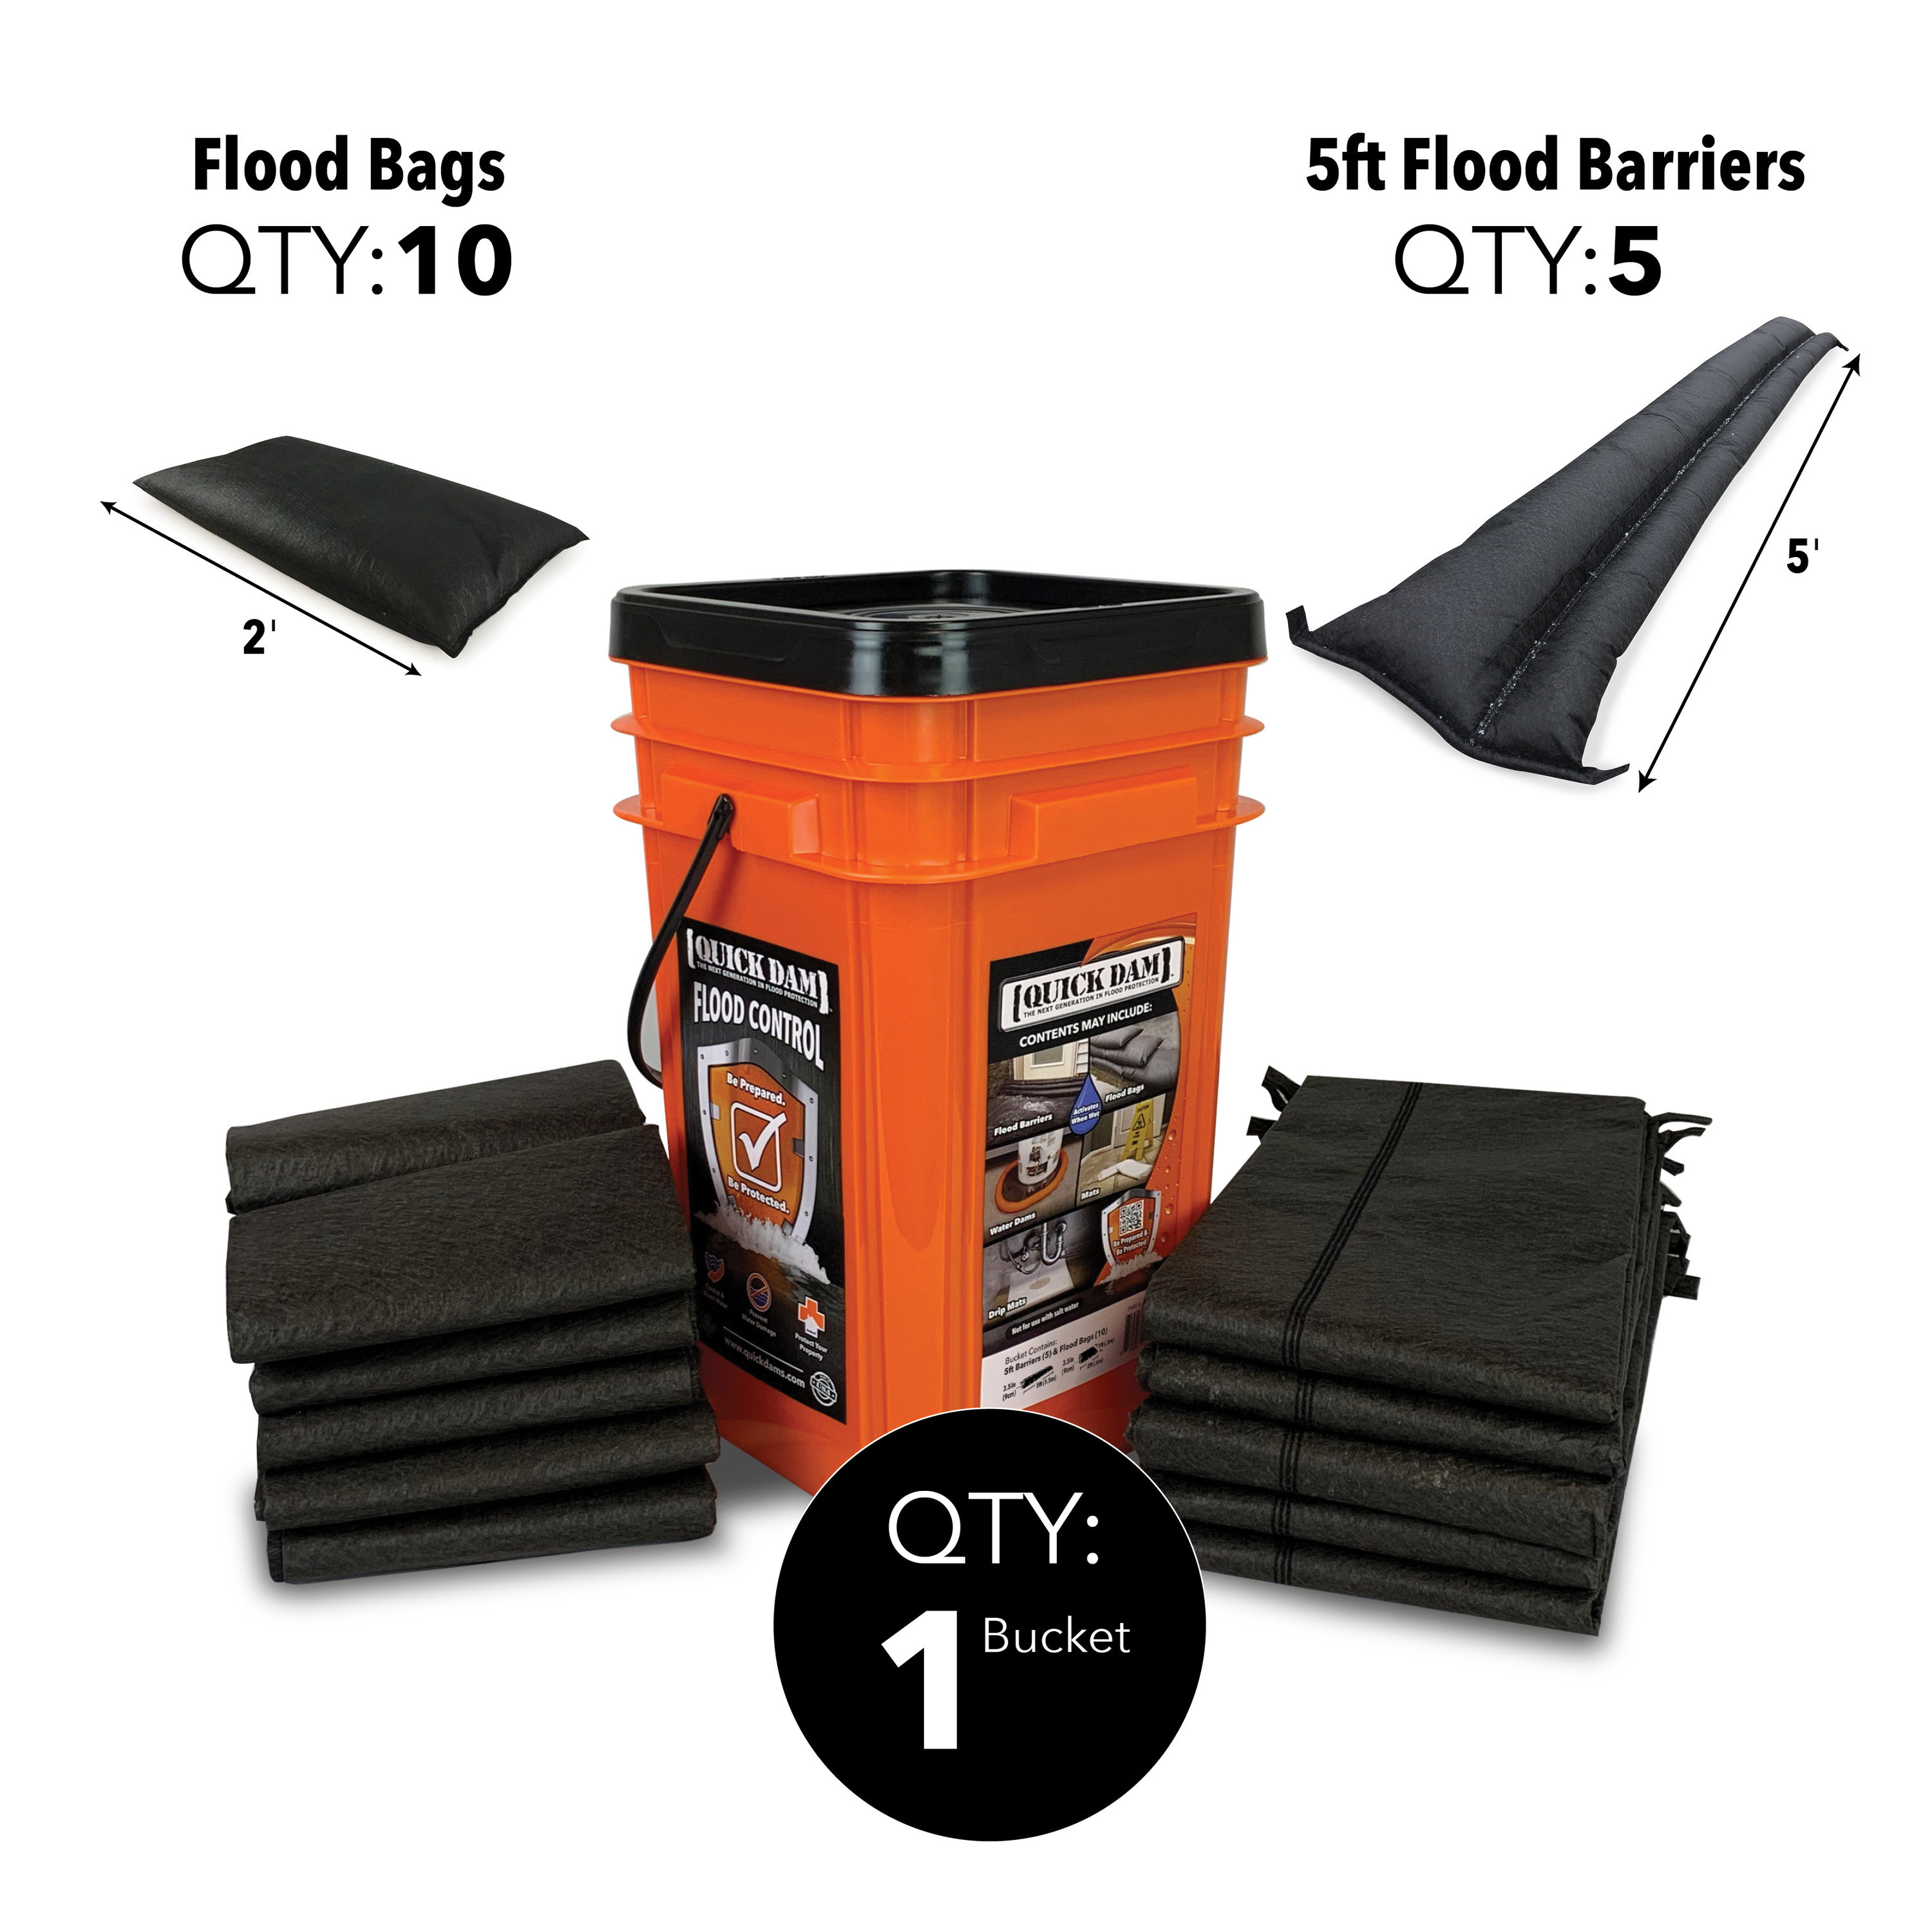 Quick Dam Flood Bags at